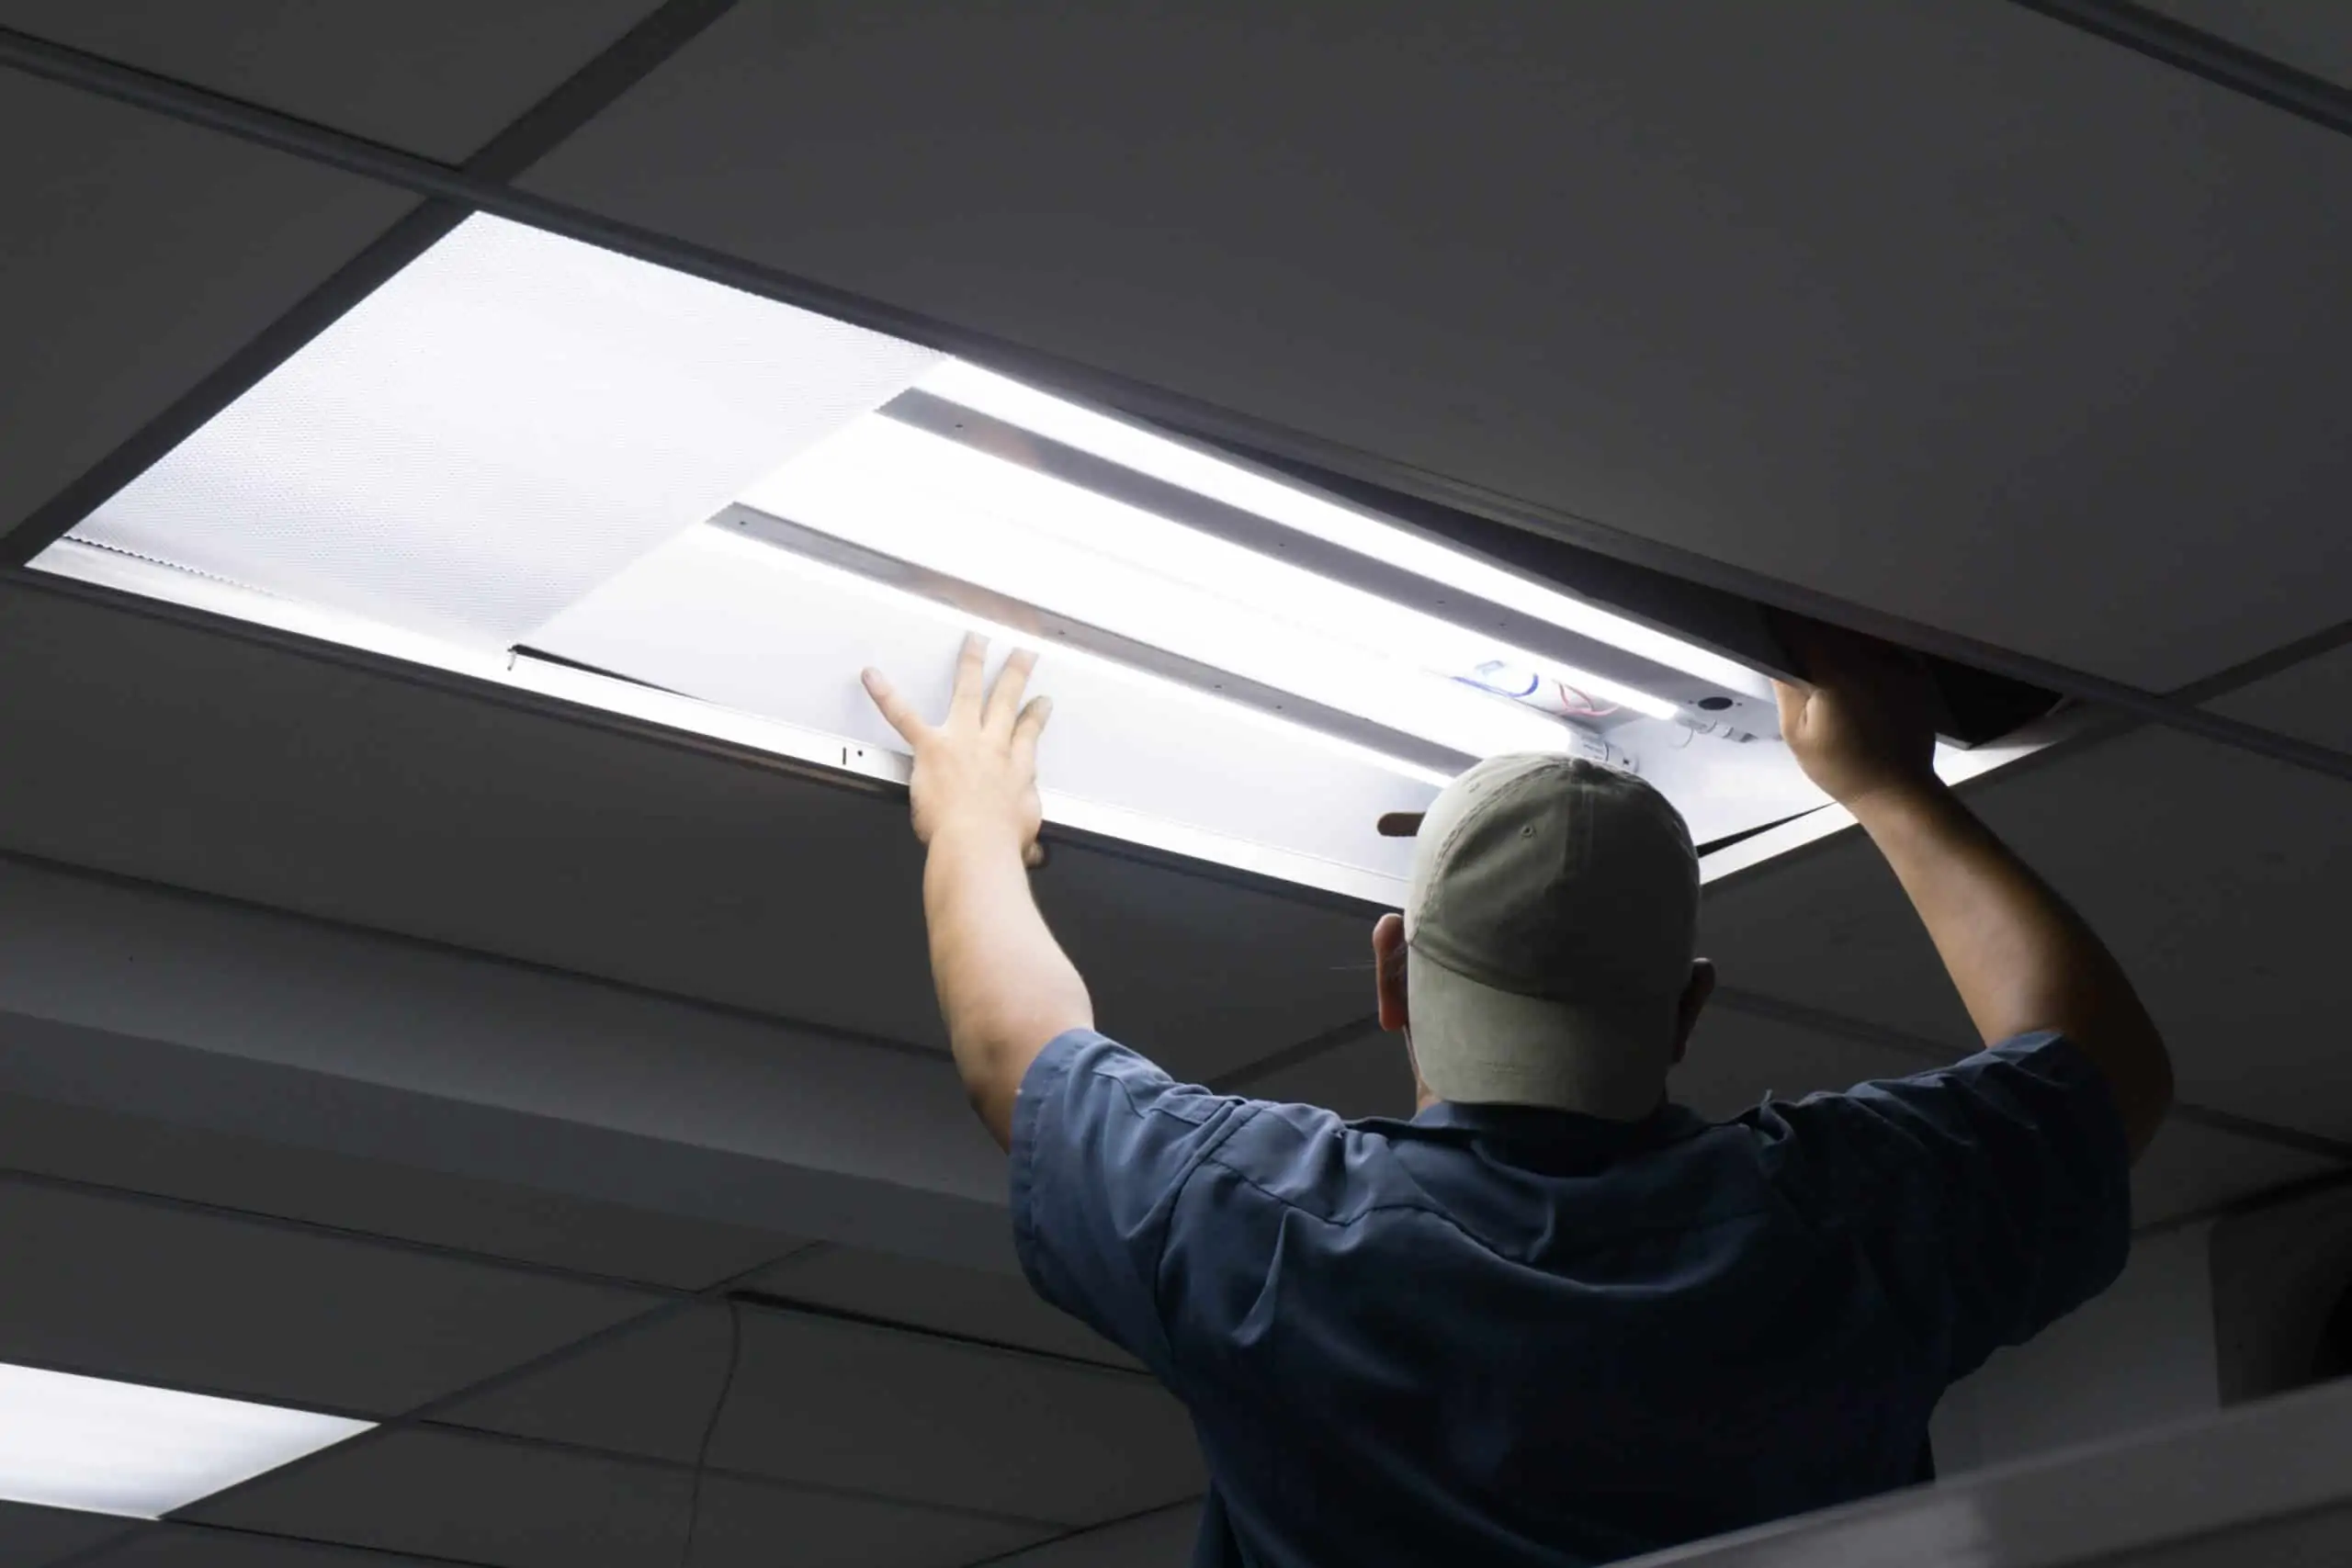 With their back turned away from the camera, an electrician removes a ceiling light panel.